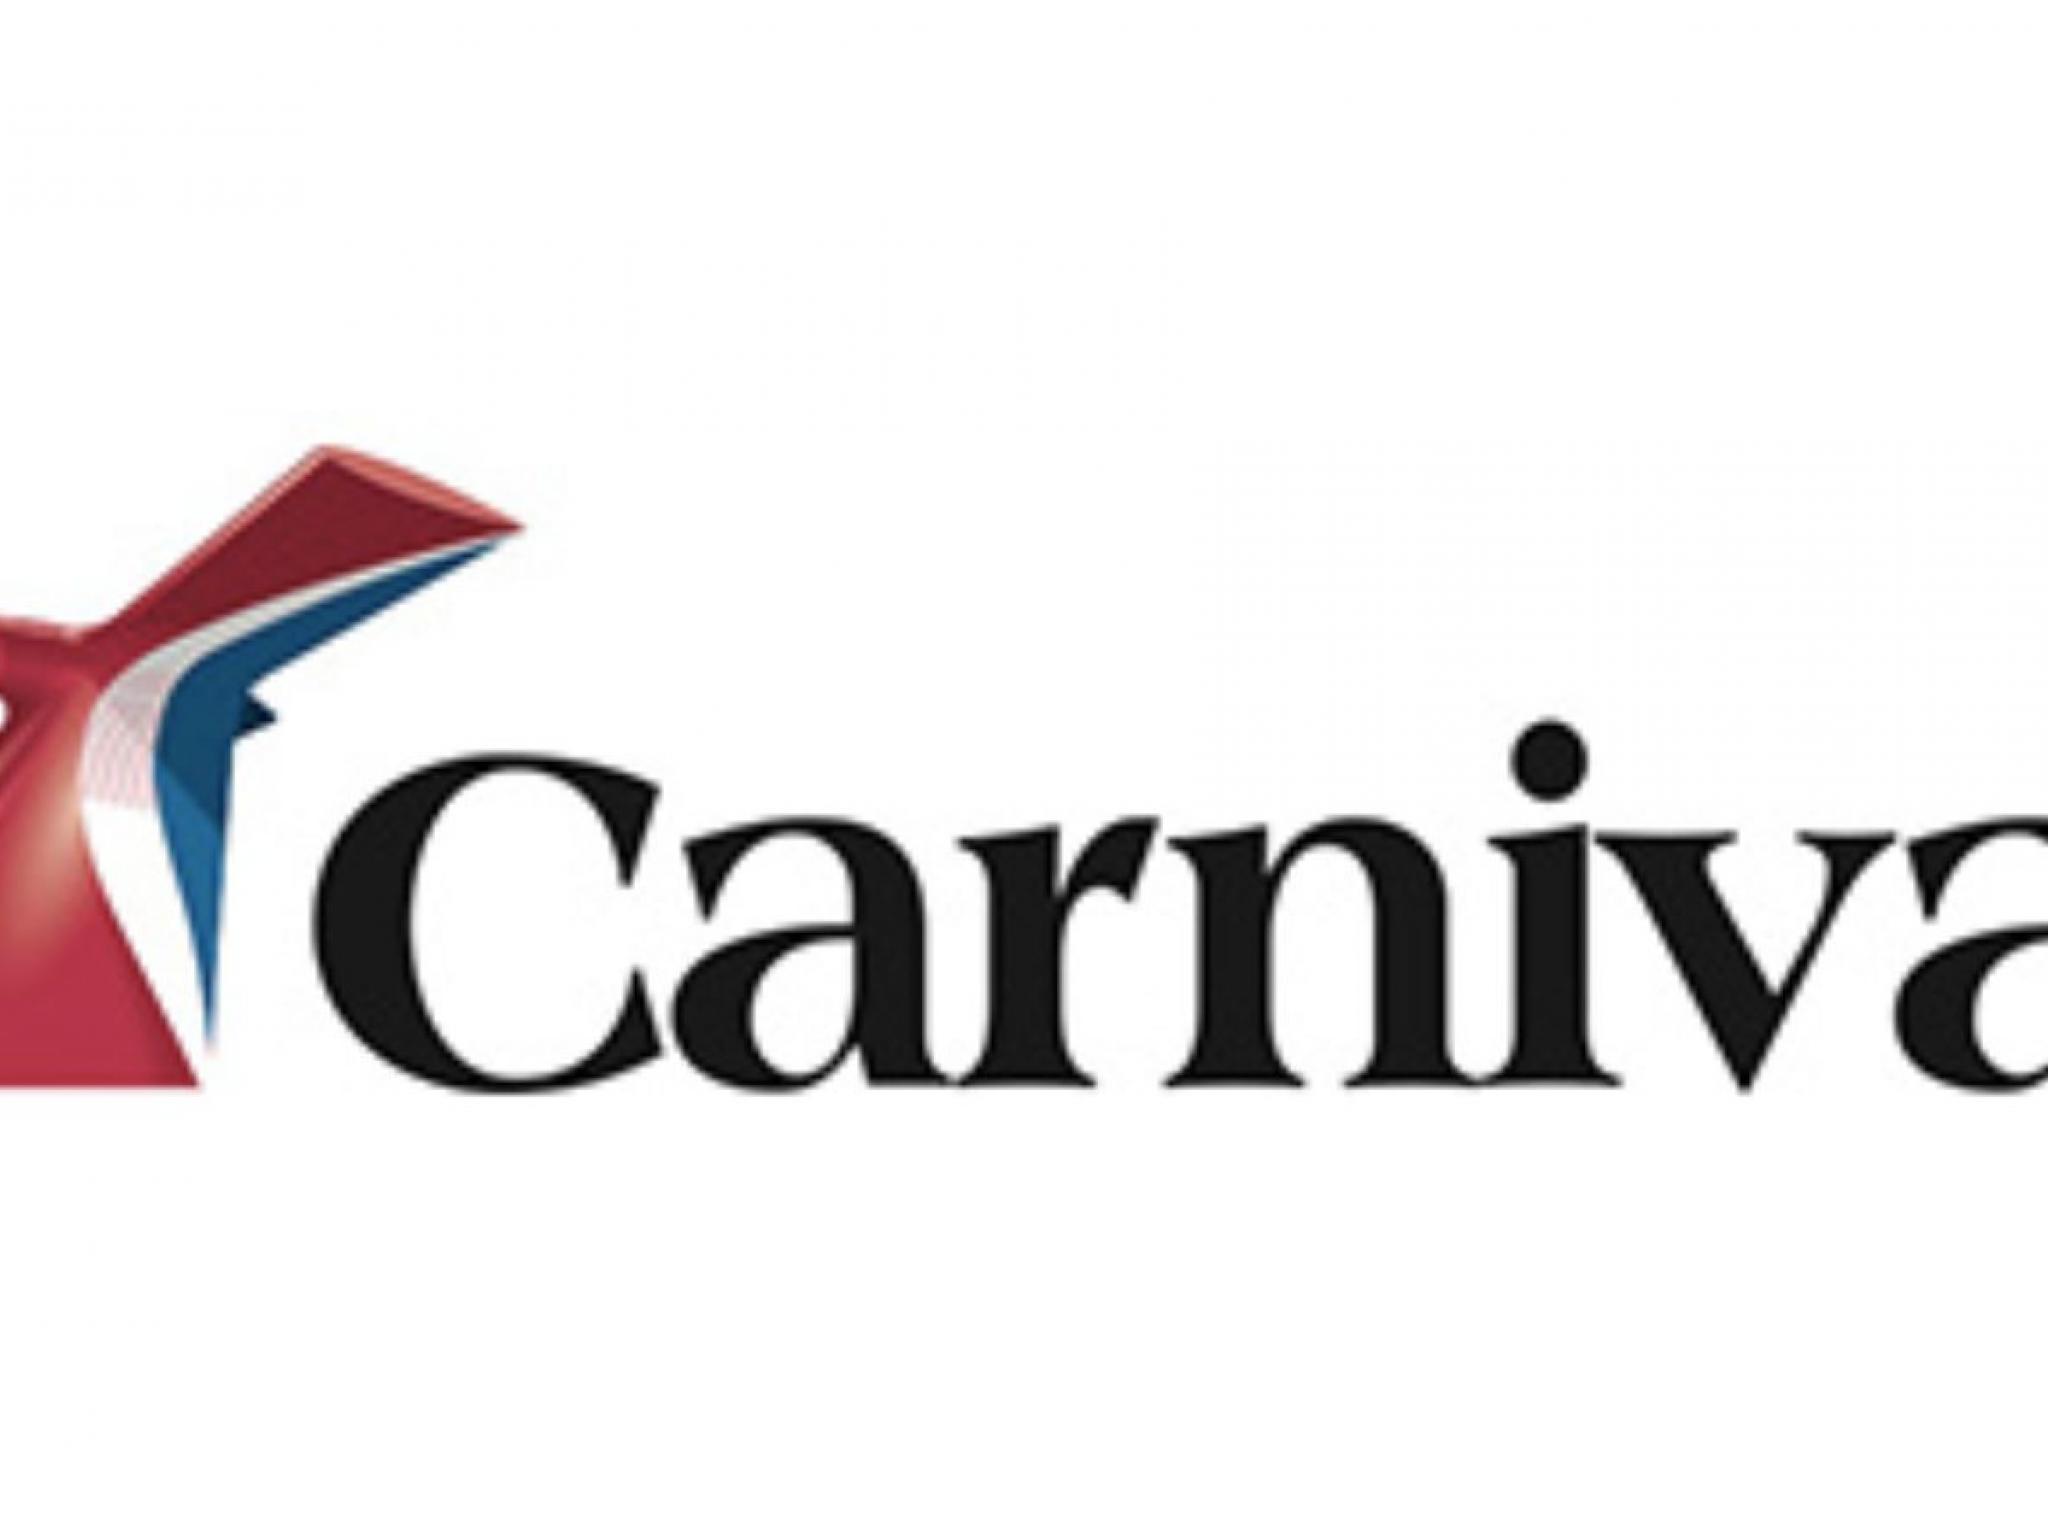  carnival-smart-global-friedman-industries-and-other-big-stocks-moving-higher-on-friday 